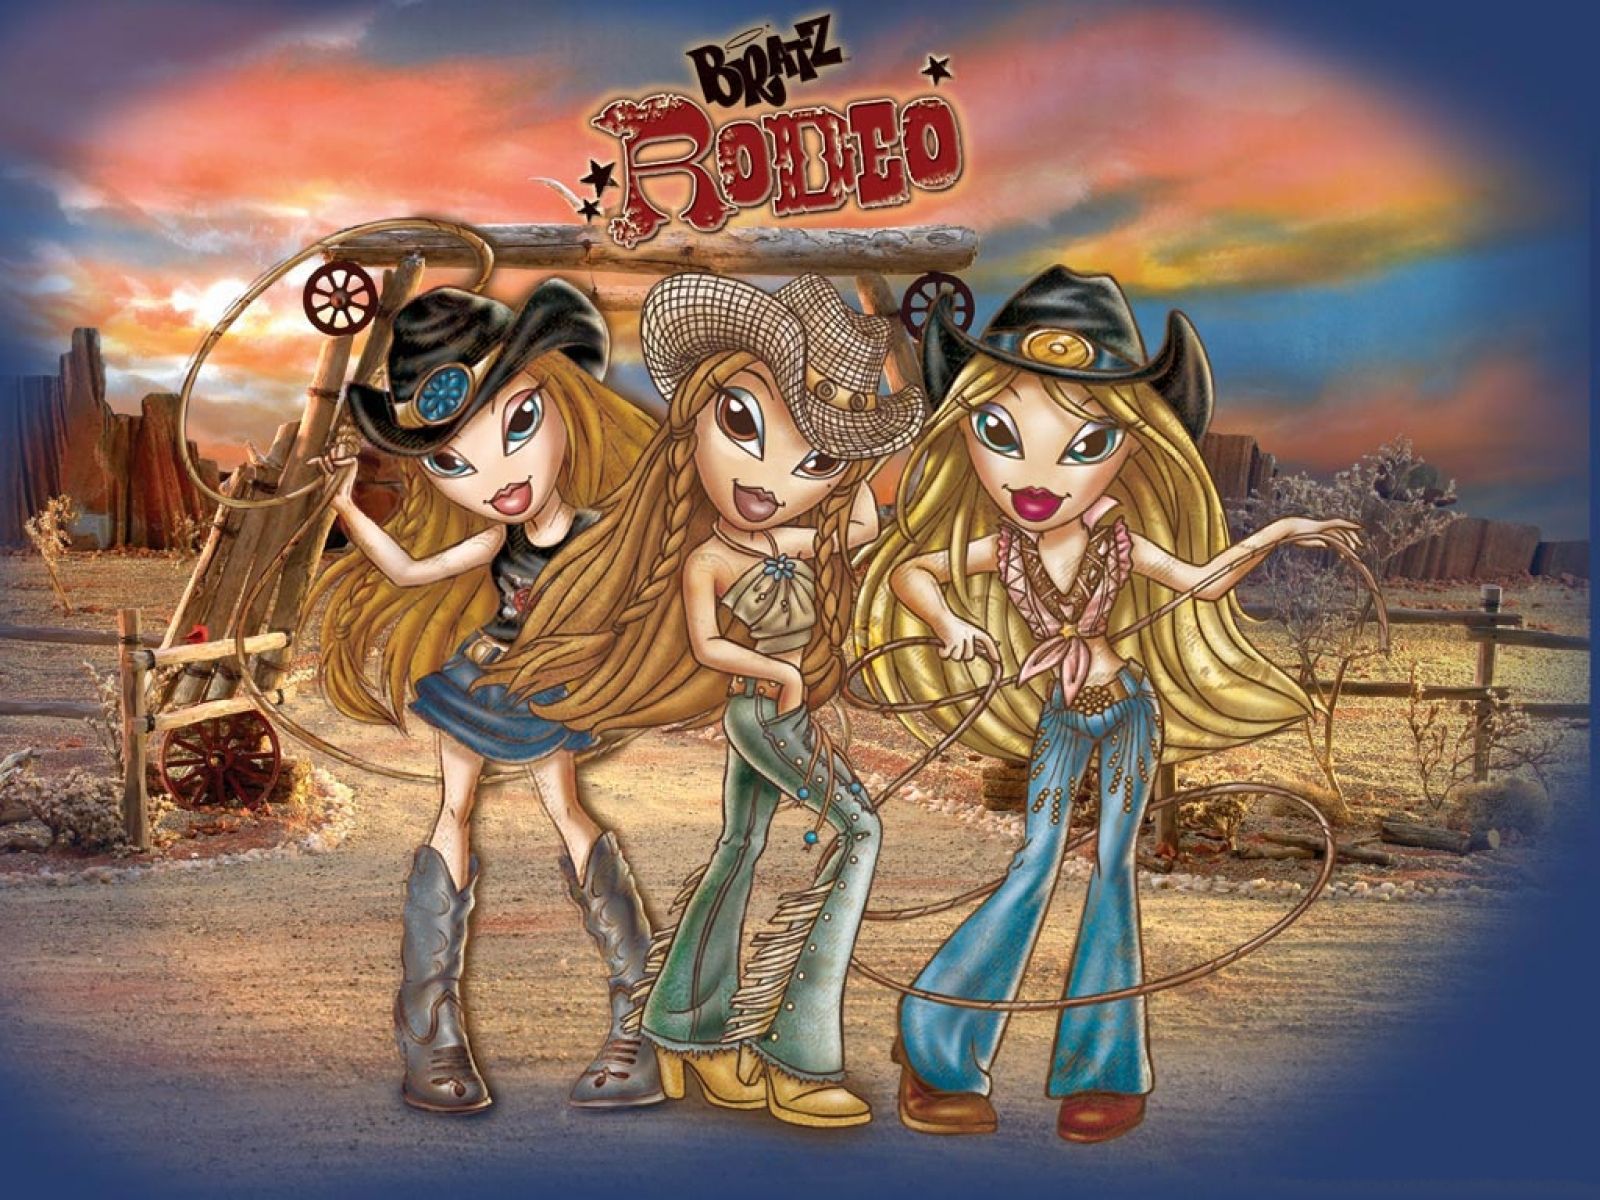 The three girls are standing in front of a cowboy - Bratz